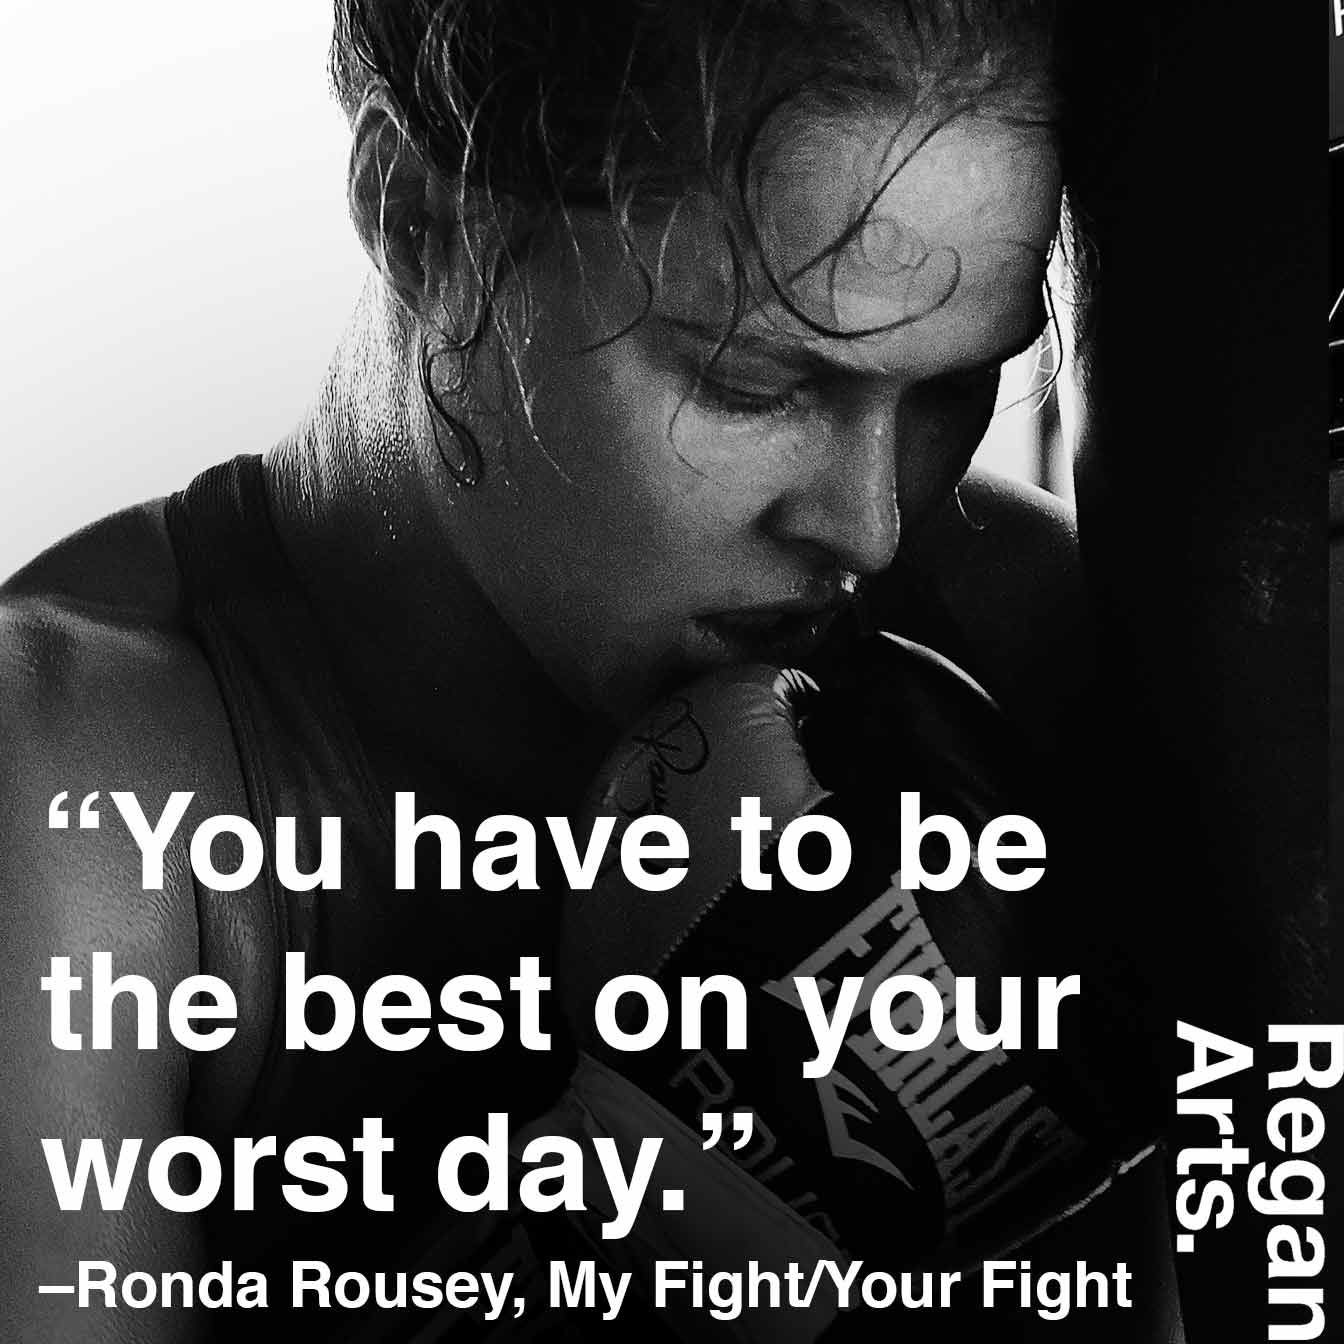 Ronda Rousey Motivational Quotes
 "You have to be the best on your worst day"